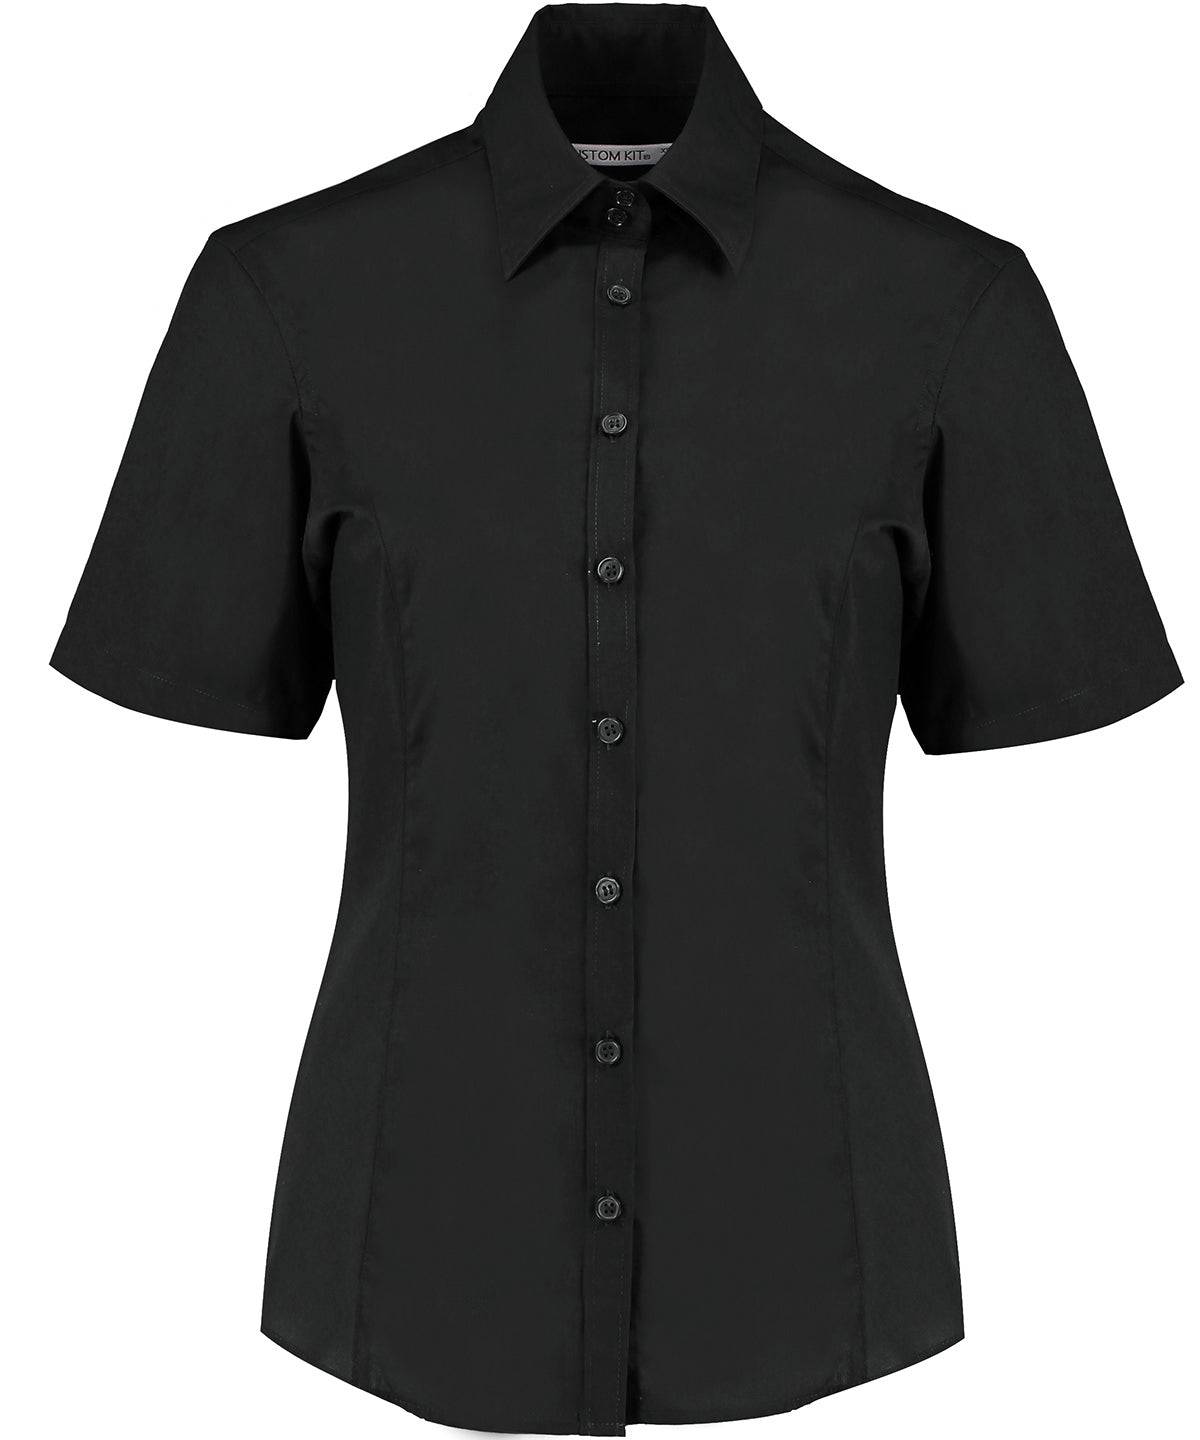 Black* - Business blouse short-sleeved (tailored fit)